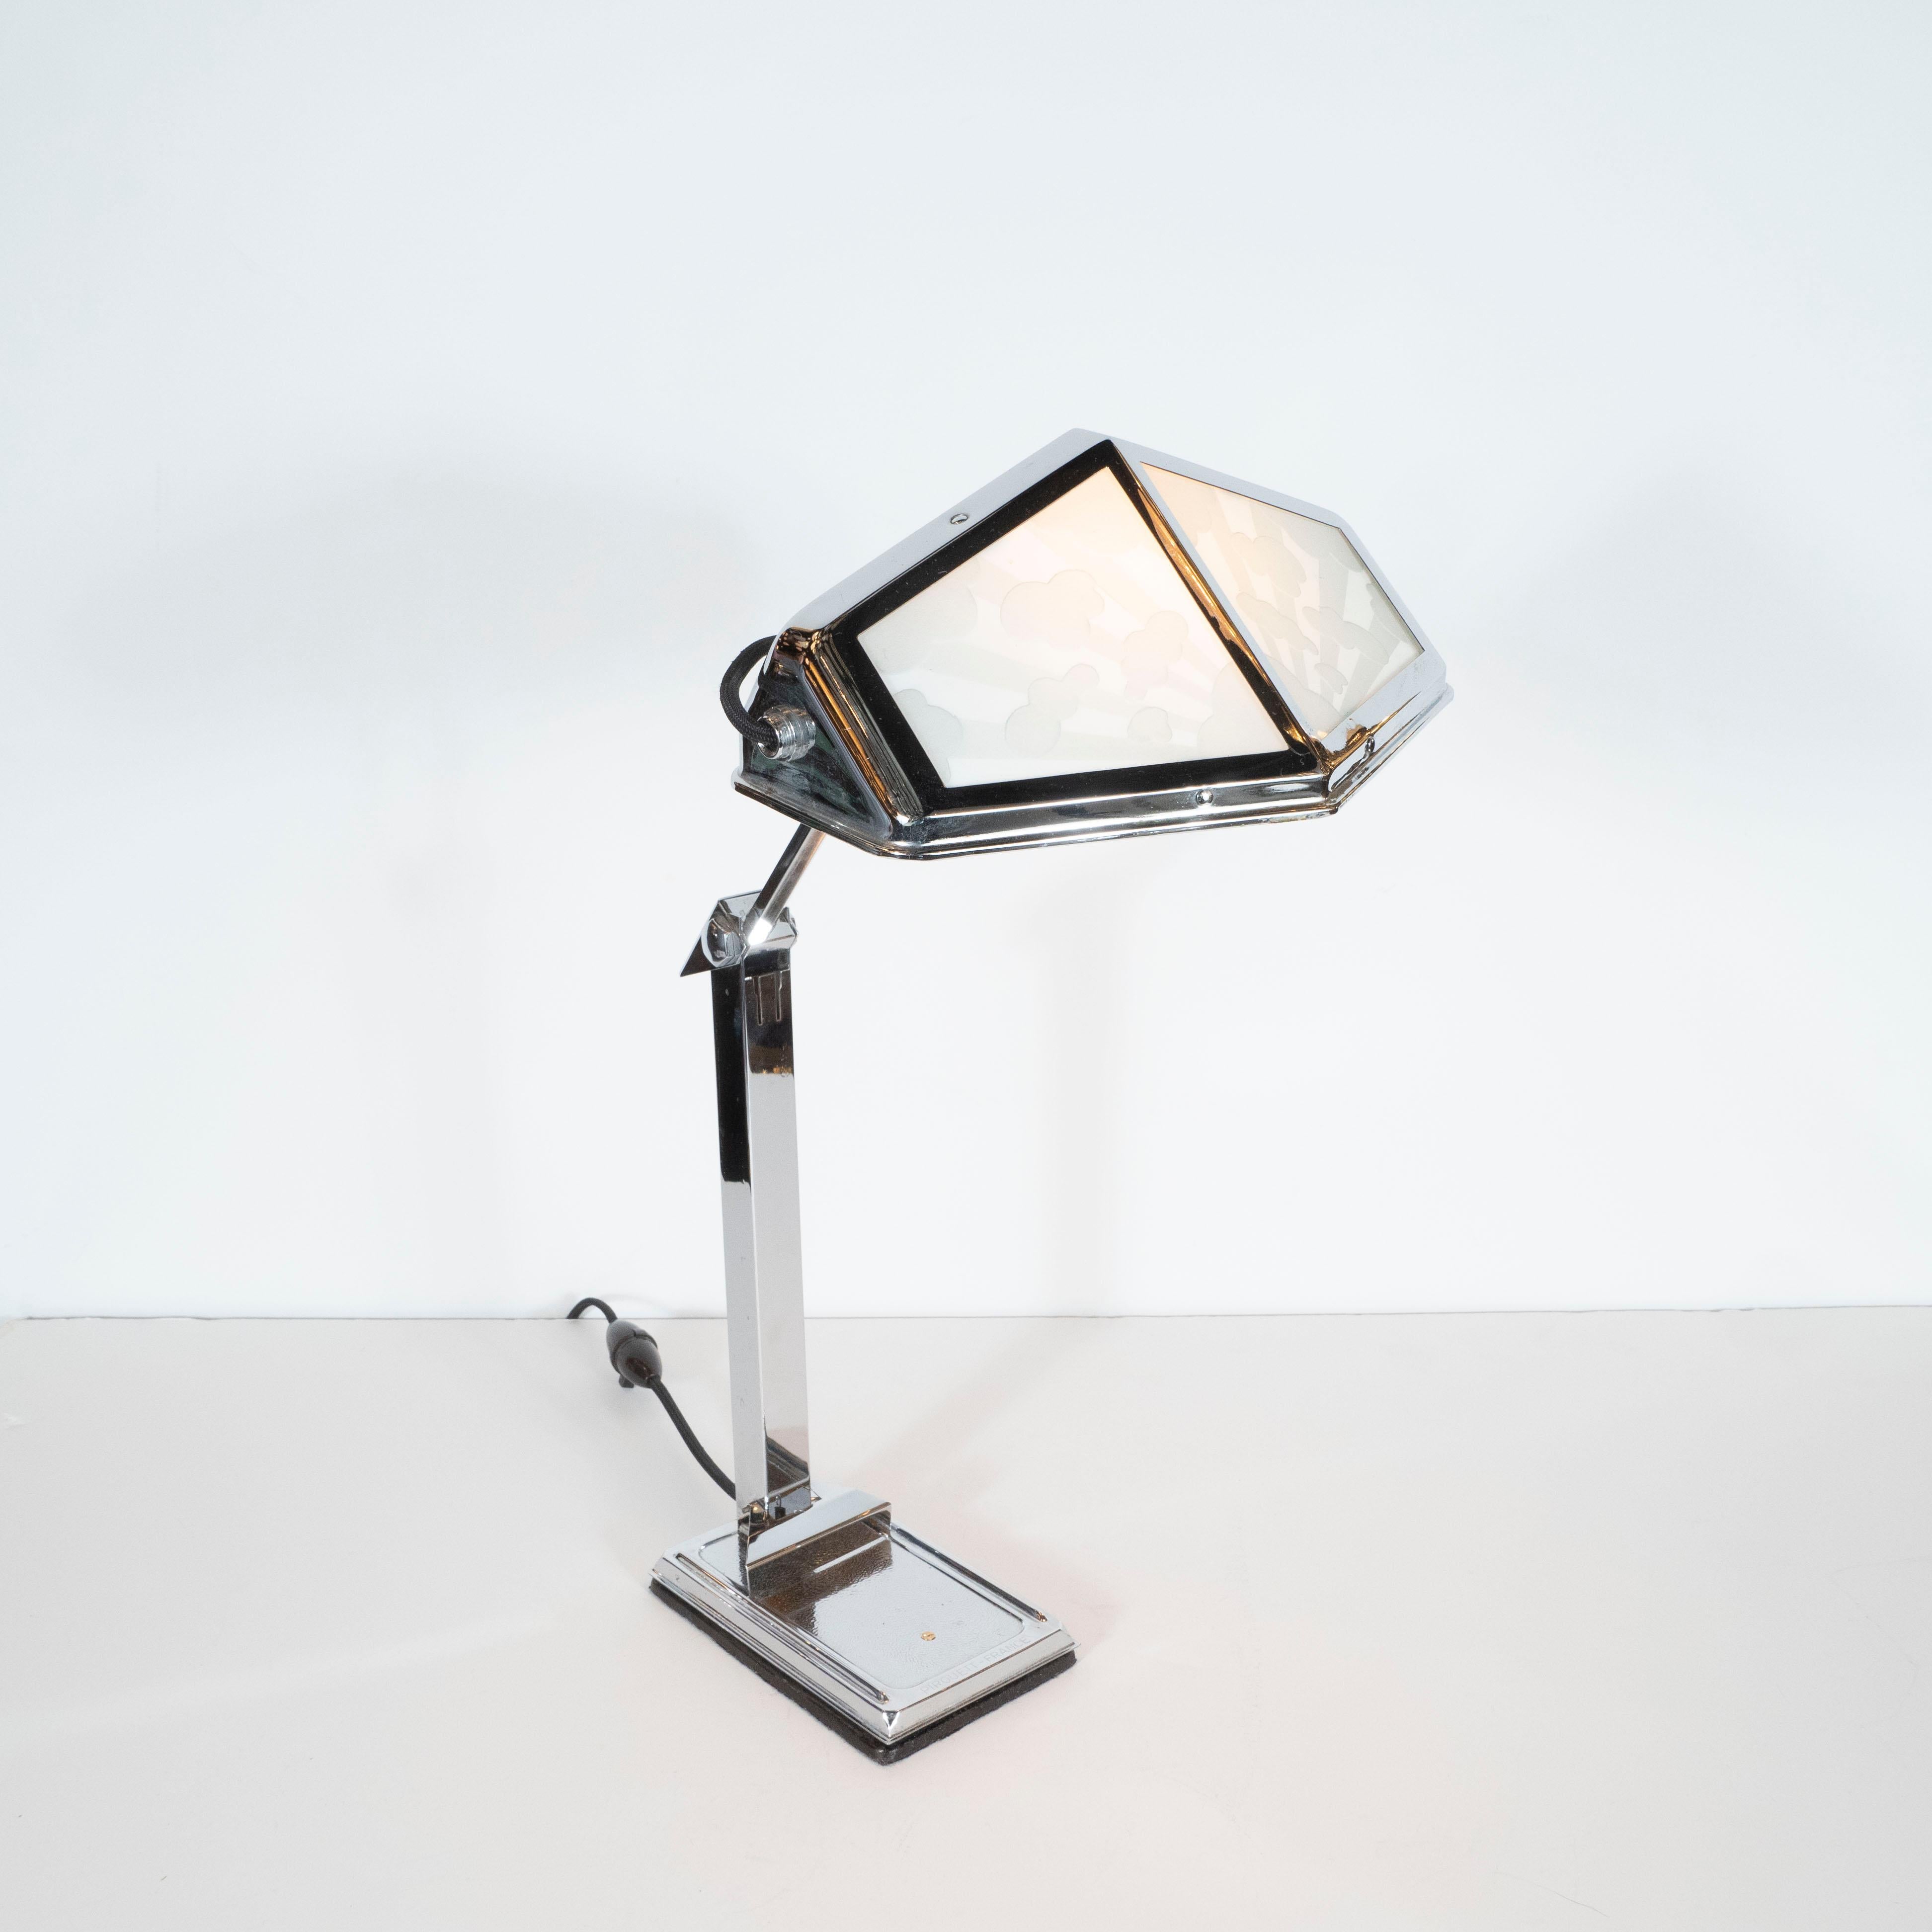 This stunning Art Deco Machine Age table lamp was realized in France, circa 1935. It features a shade 12 sided polygonal nickel frame that holds two pairs of glass shades in frosted glass (of two varying levels of opacity) on each side. Each